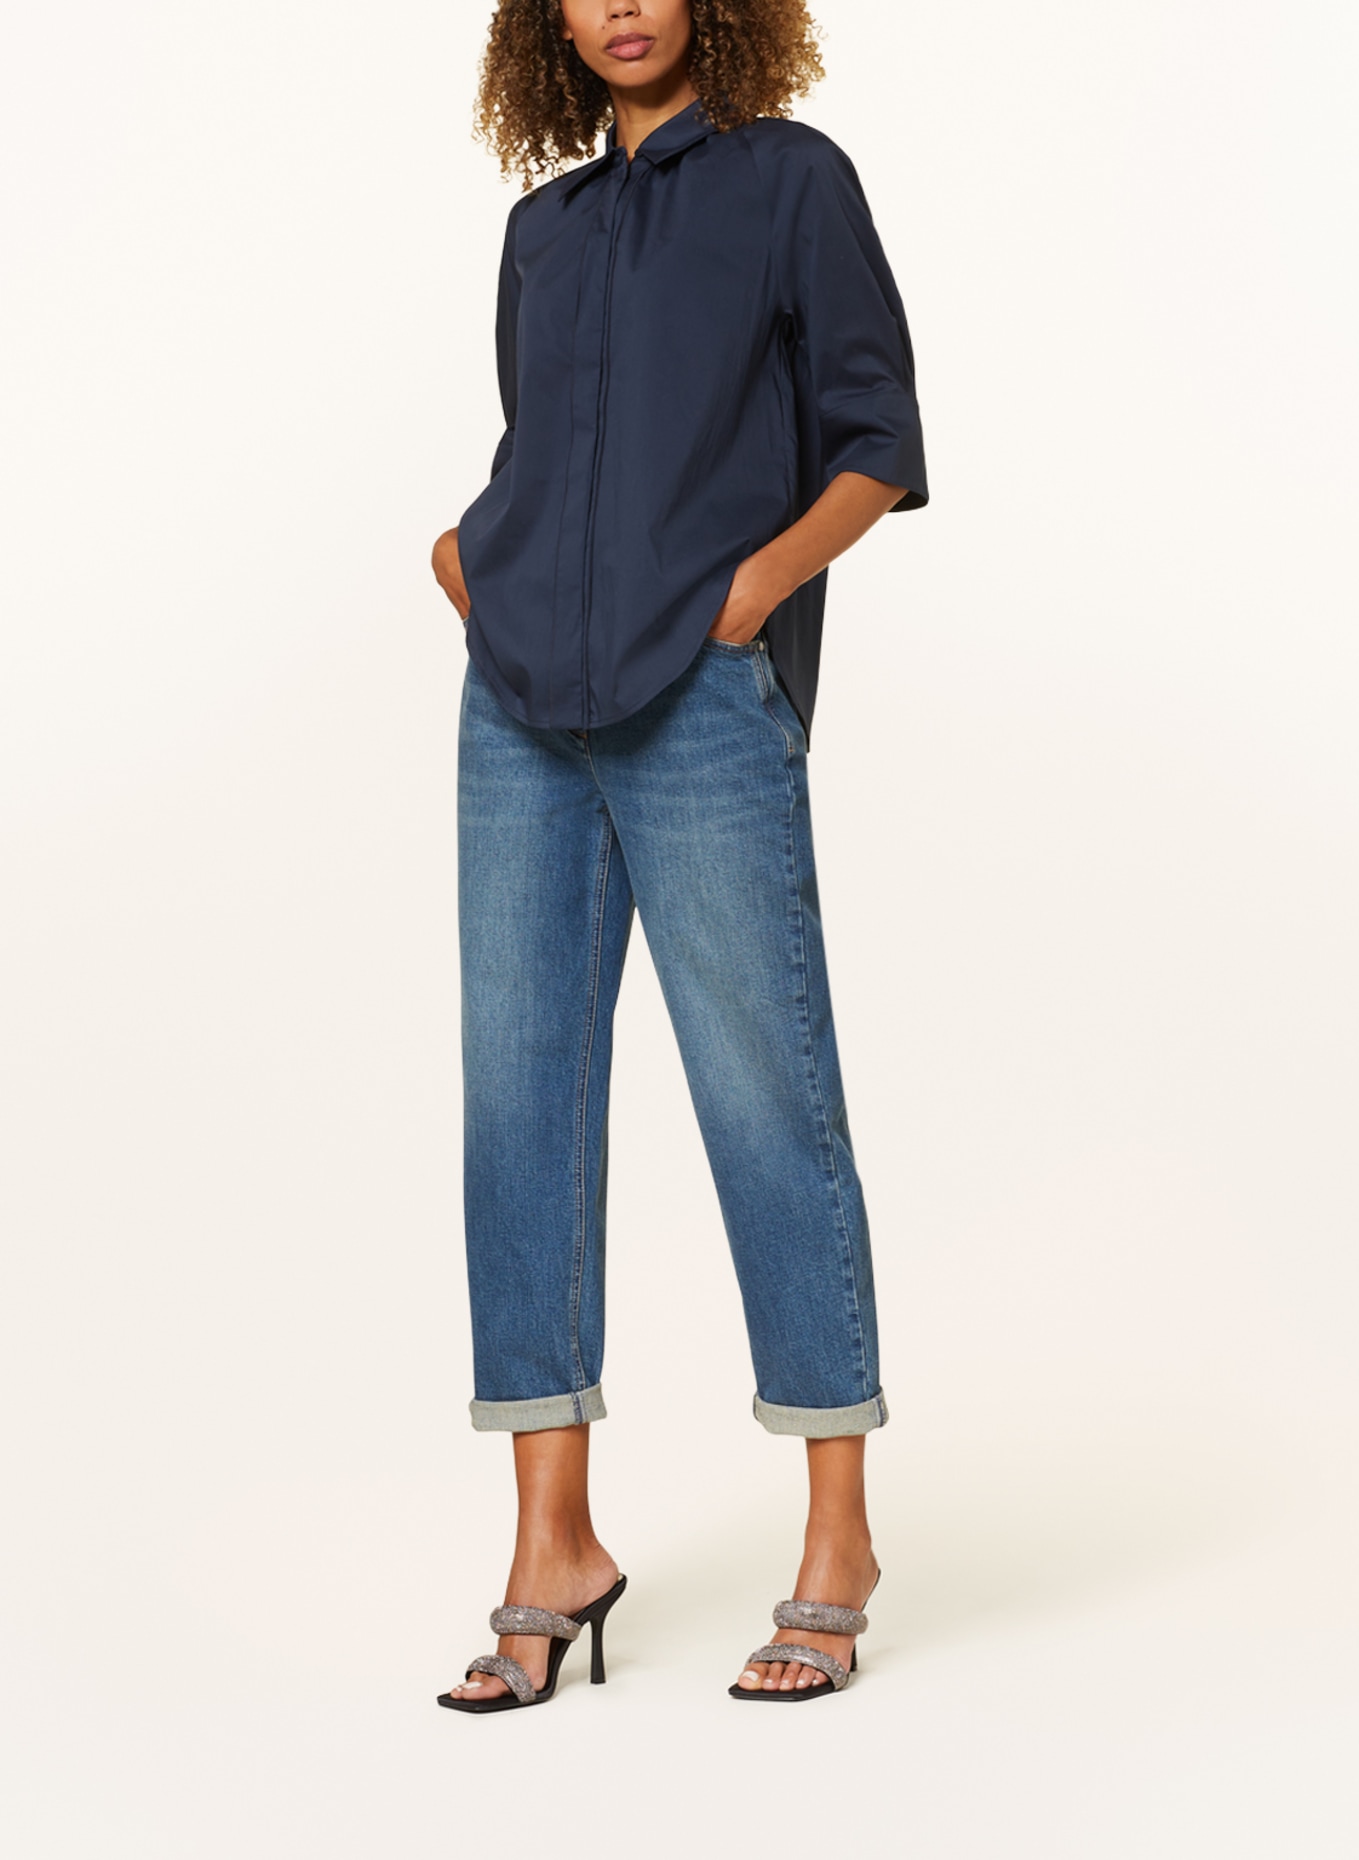 LUISA CERANO Shirt blouse with 3/4 sleeves, Color: DARK BLUE (Image 2)